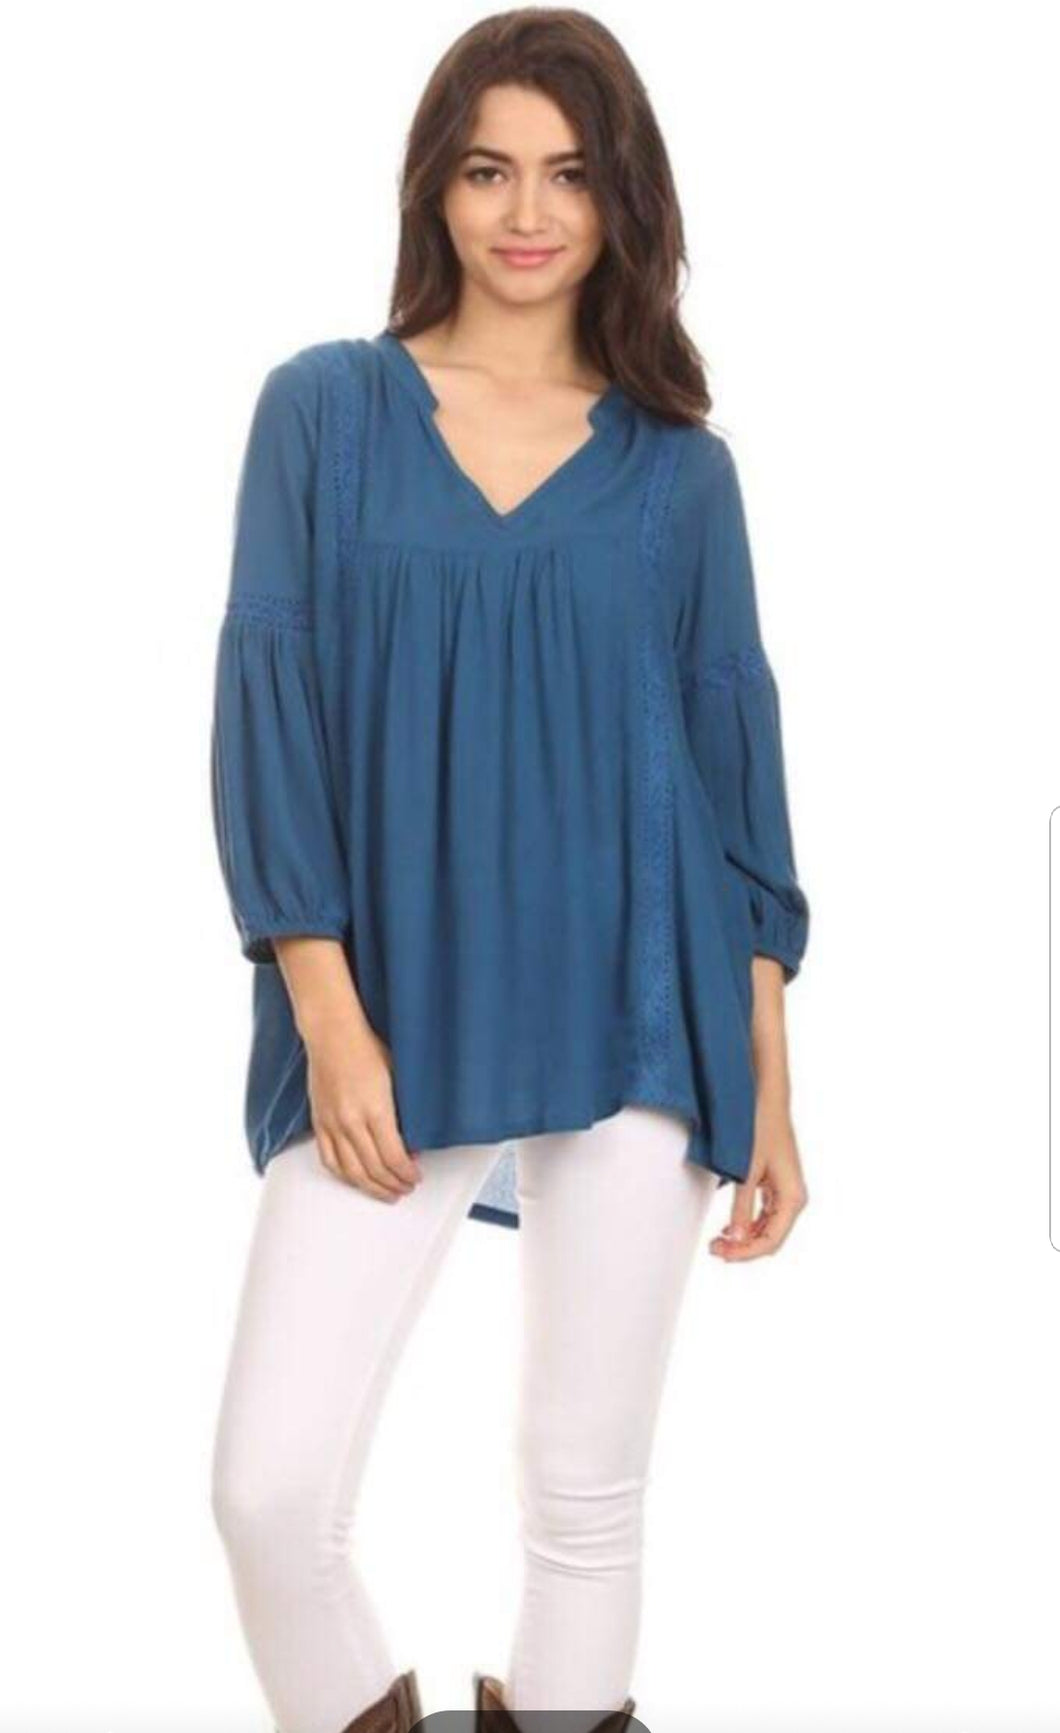 Teal 3/4 sleeve top by Lady's World